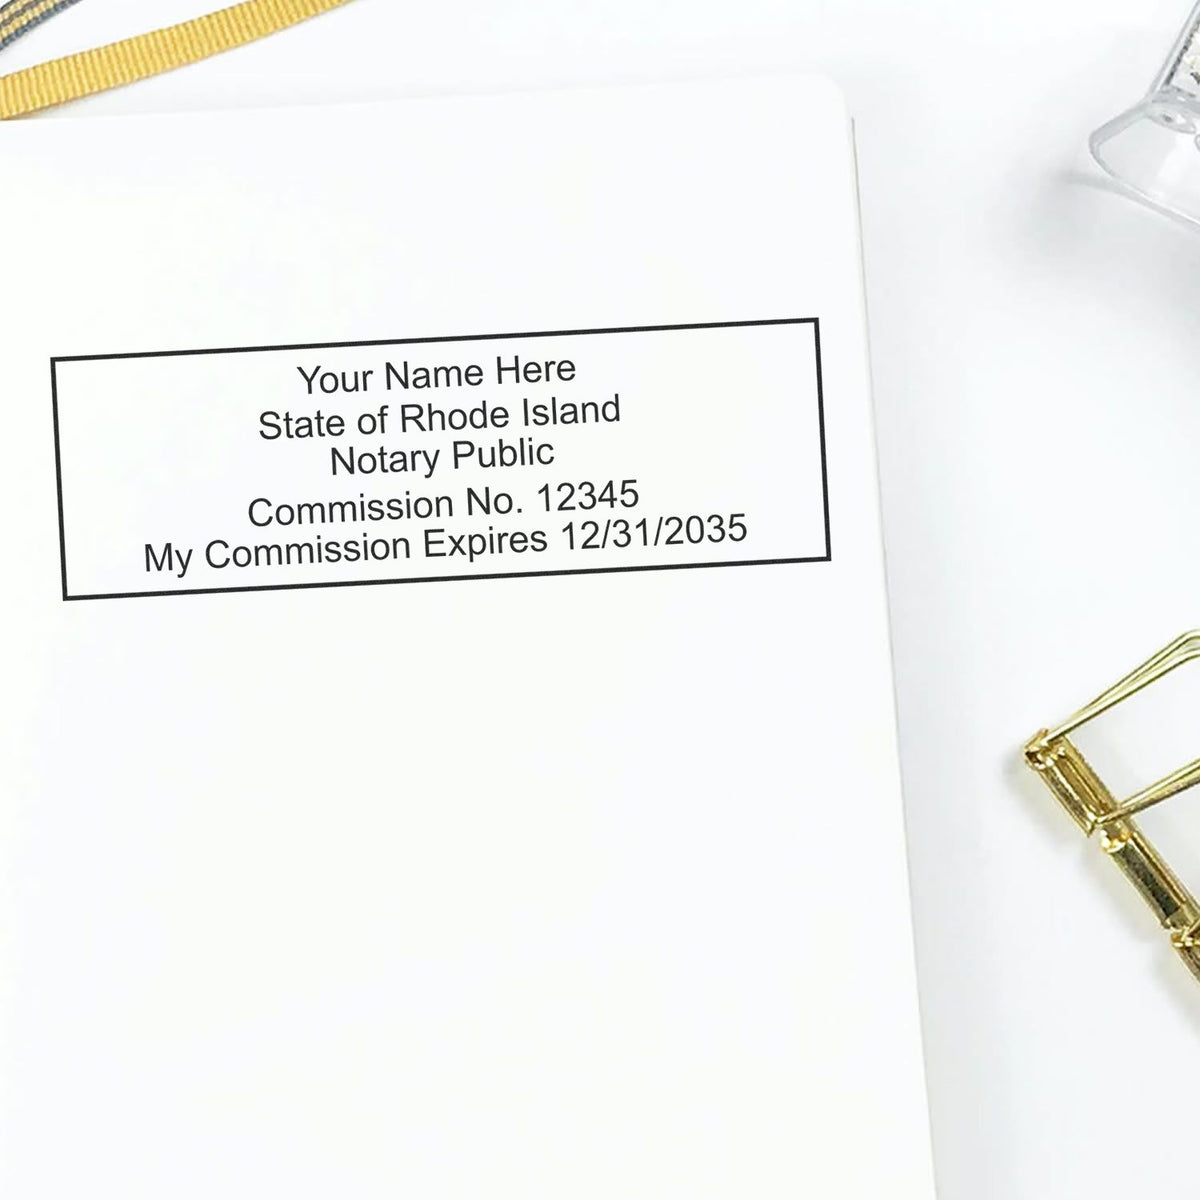 A lifestyle photo showing a stamped image of the Heavy-Duty Rhode Island Rectangular Notary Stamp on a piece of paper